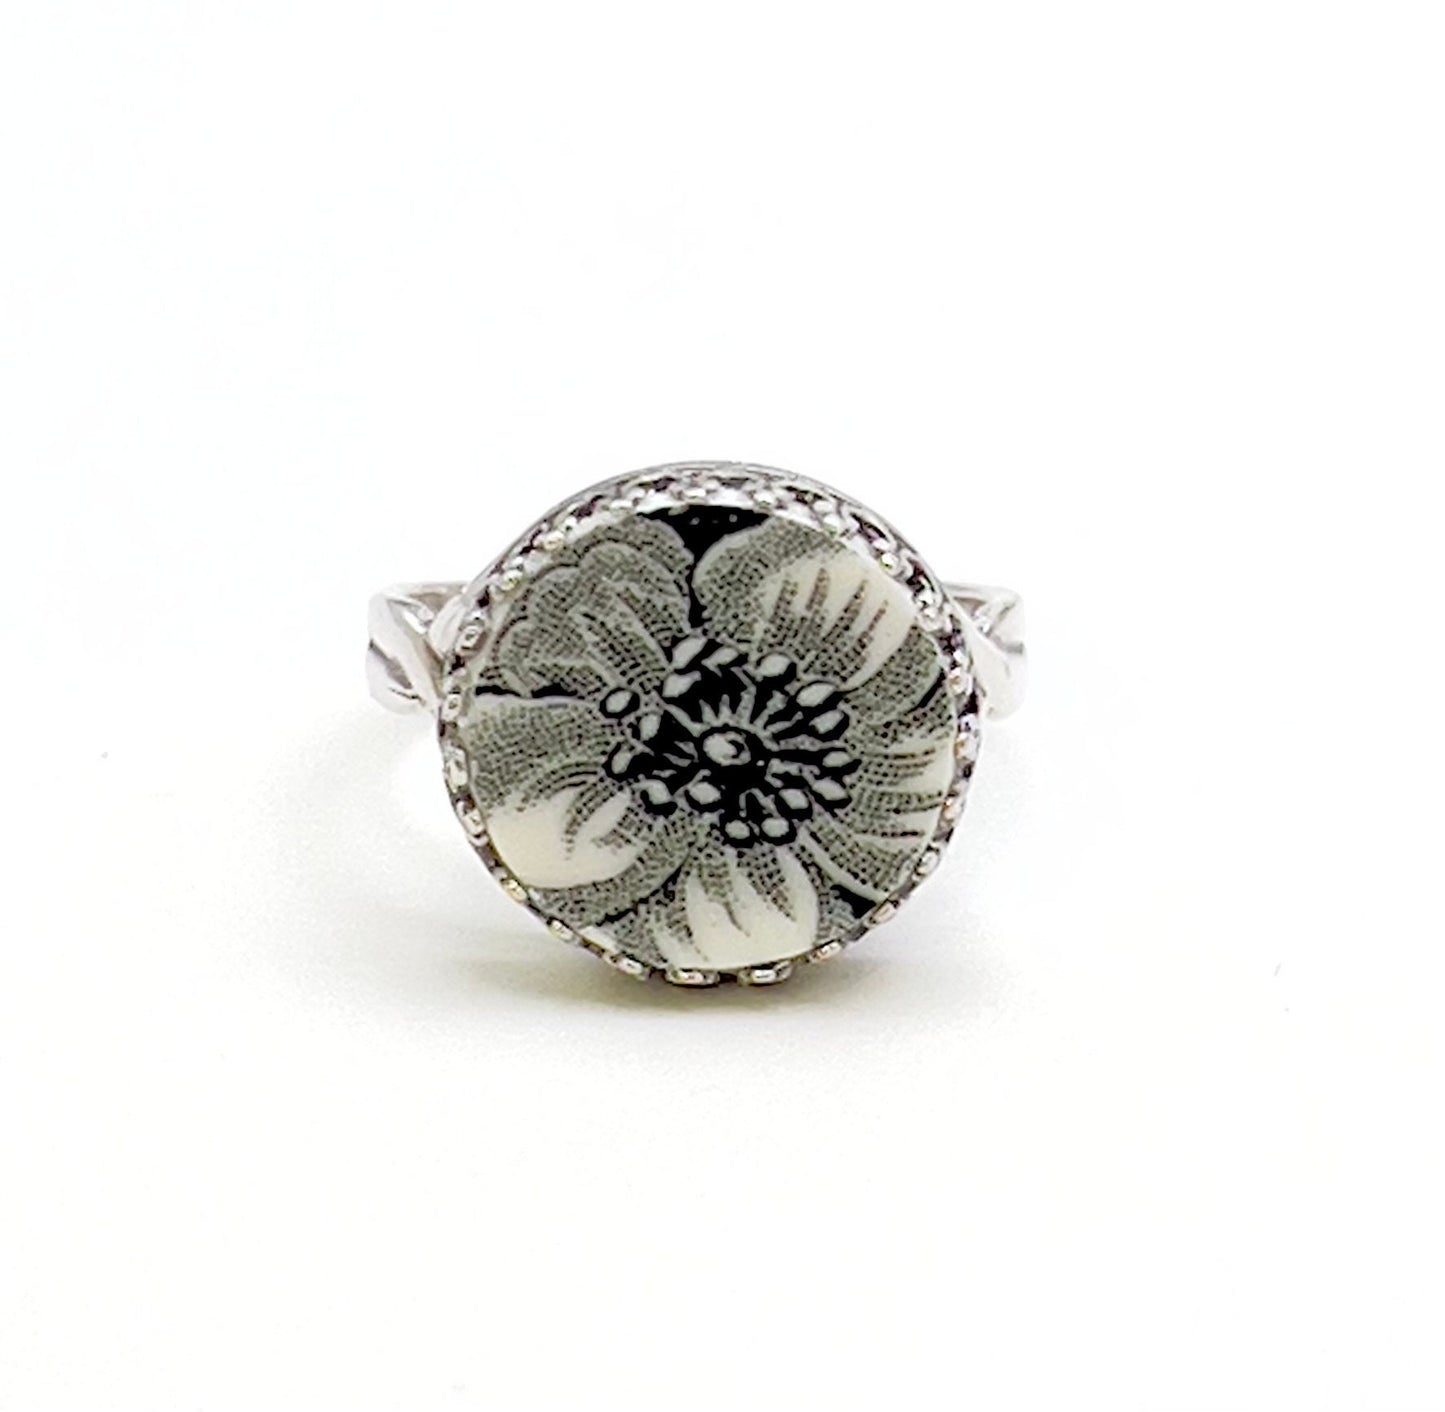 Black Flower Ring, Transferware Broken China Jewelry, Sterling Silver Adjustable Ring for Women, Vintage China Jewelry Gift